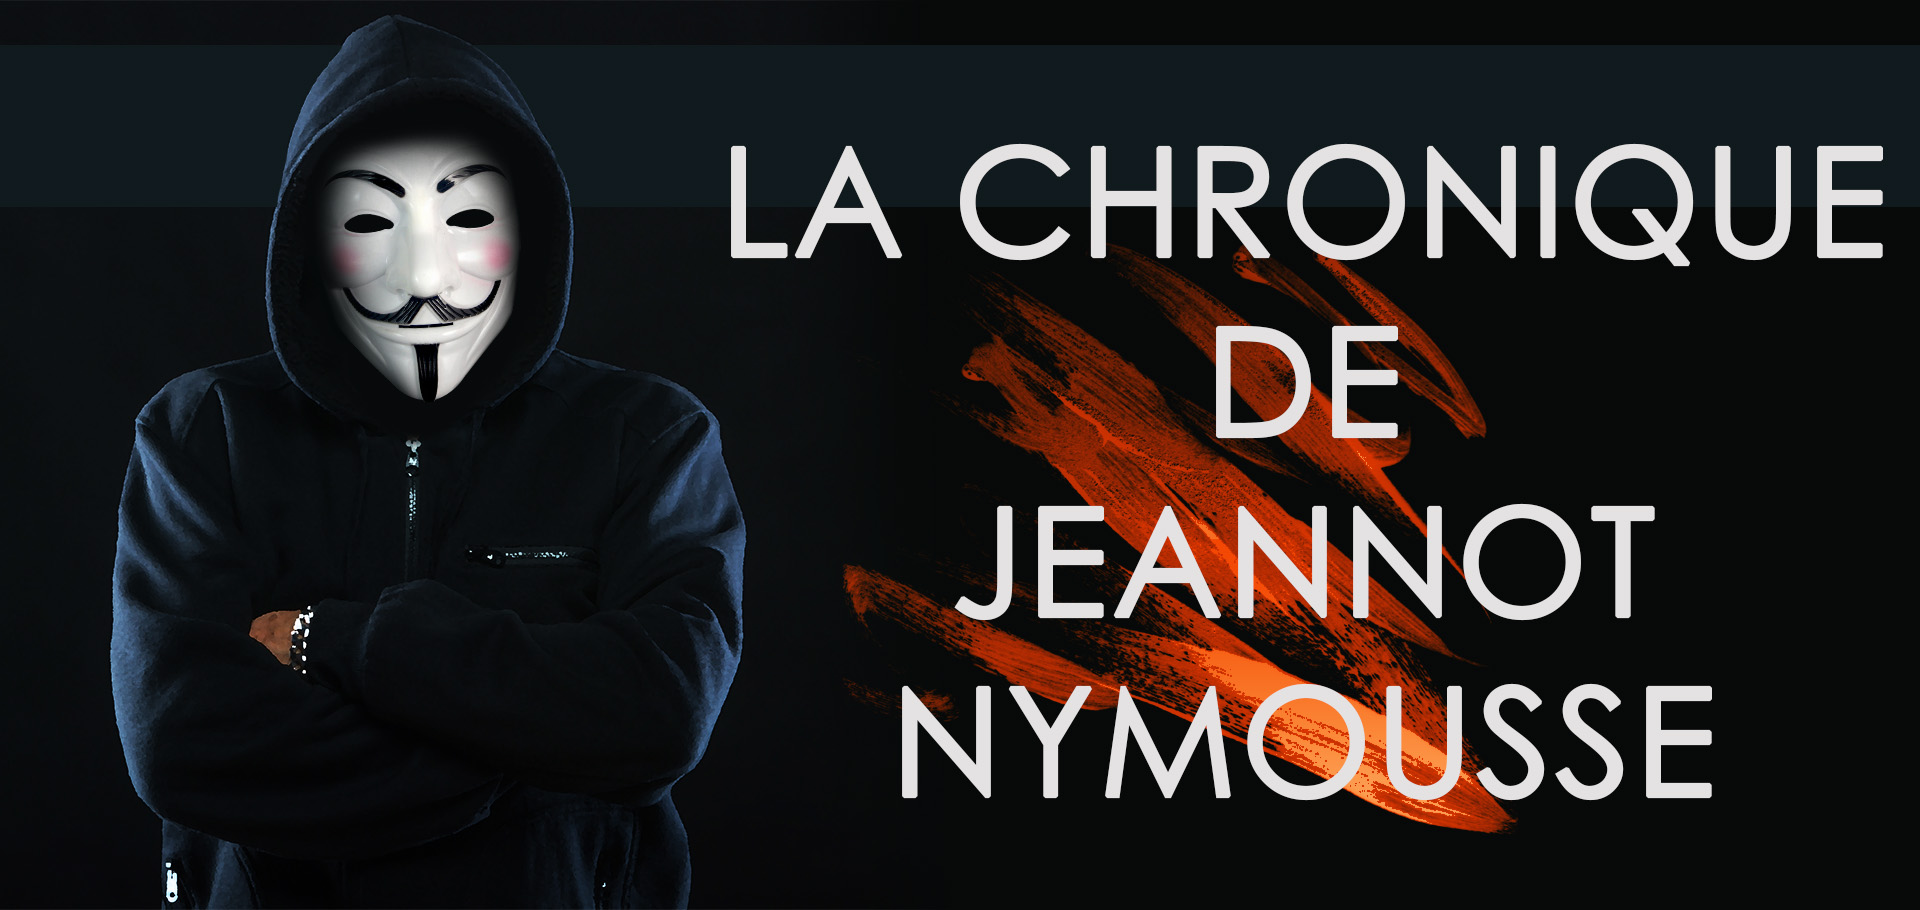 jeannot nymousse